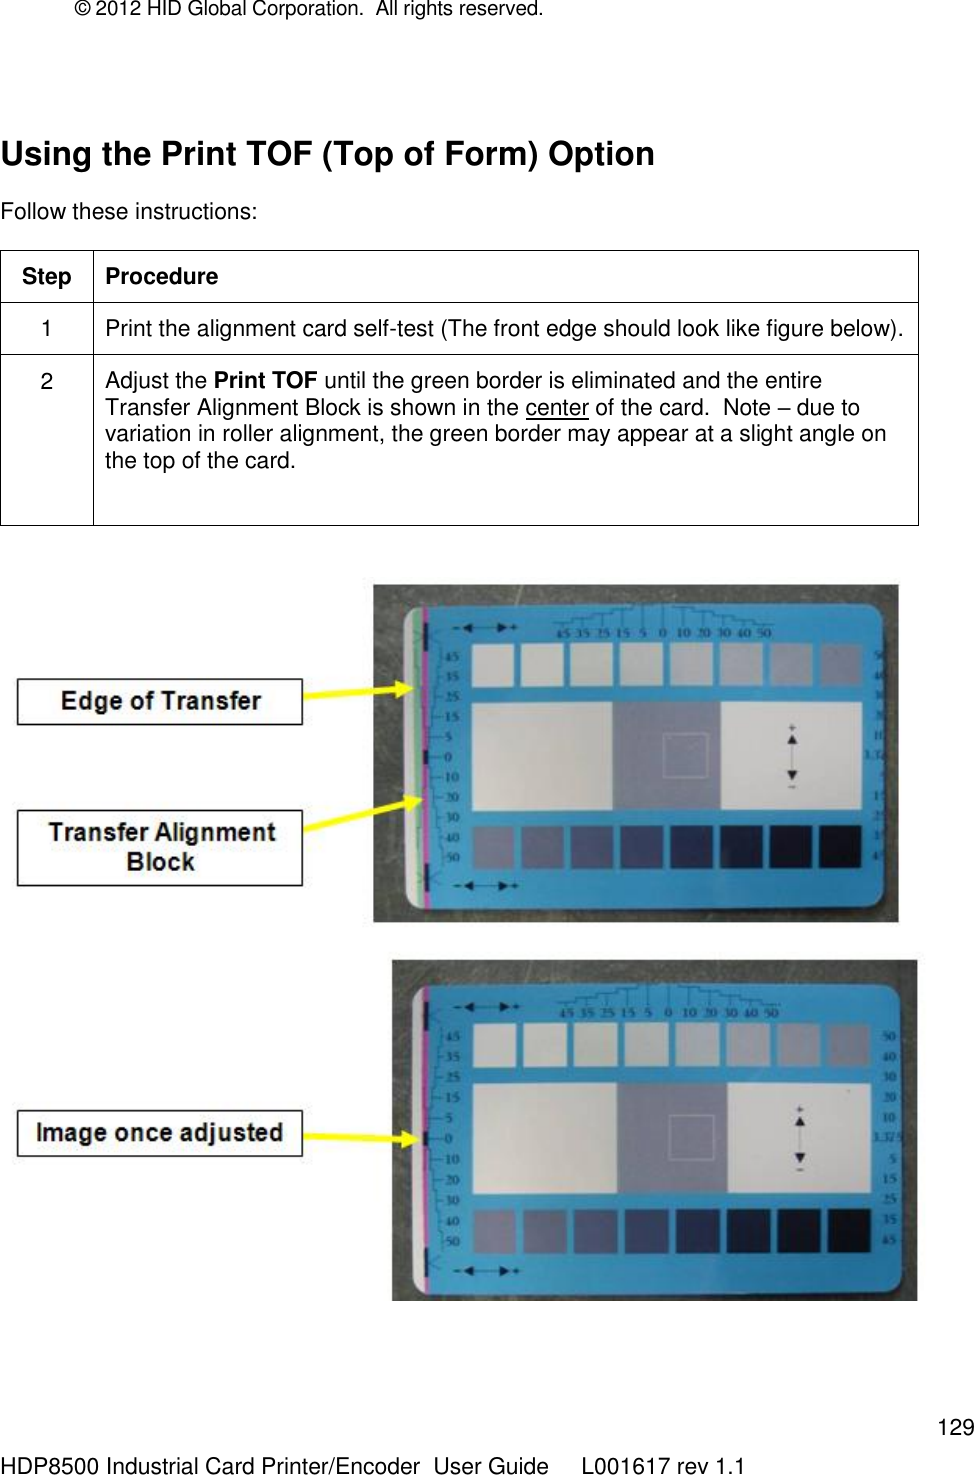 © 2012 HID Global Corporation.  All rights reserved.  129 HDP8500 Industrial Card Printer/Encoder  User Guide     L001617 rev 1.1  Using the Print TOF (Top of Form) Option   Follow these instructions: Step Procedure 1 Print the alignment card self-test (The front edge should look like figure below). 2 Adjust the Print TOF until the green border is eliminated and the entire Transfer Alignment Block is shown in the center of the card.  Note – due to variation in roller alignment, the green border may appear at a slight angle on the top of the card.      